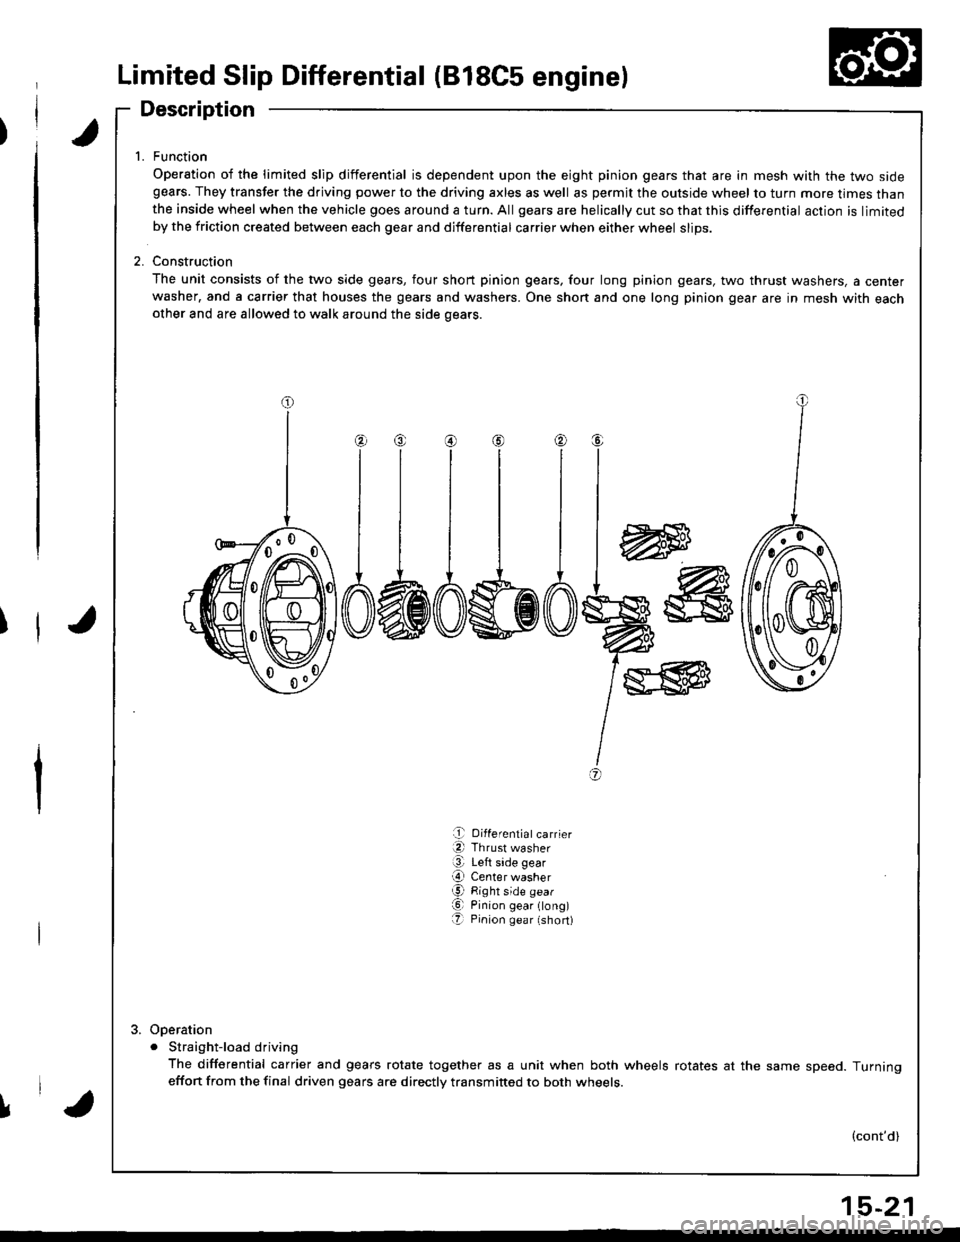 HONDA INTEGRA 1998 4.G Workshop Manual Limited Slip Differential (818C5 engine)
Description
t
f1t
1. Function
Operation of the limited slip differential is dependent upon the eight pinion gears that are in mesh with the two sidegears. They